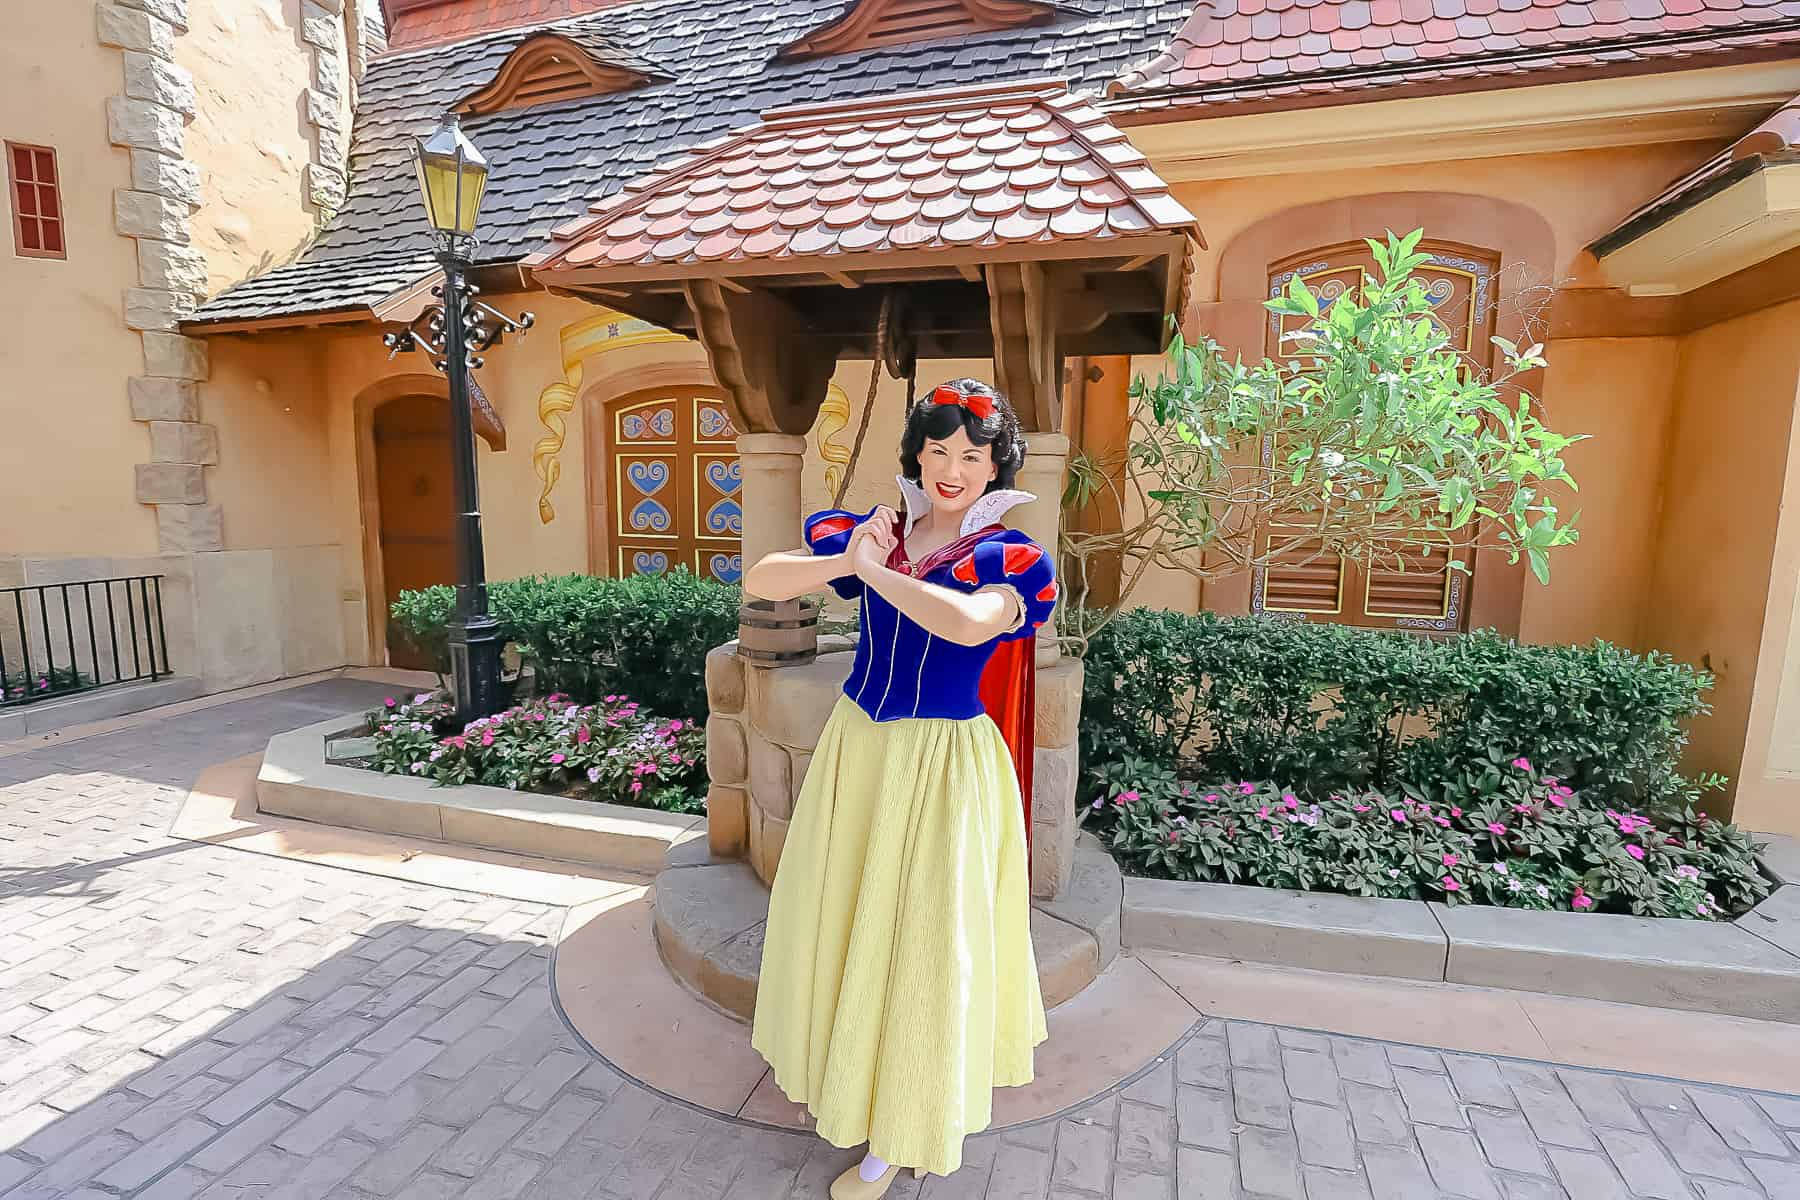 Snow White at her wishing well